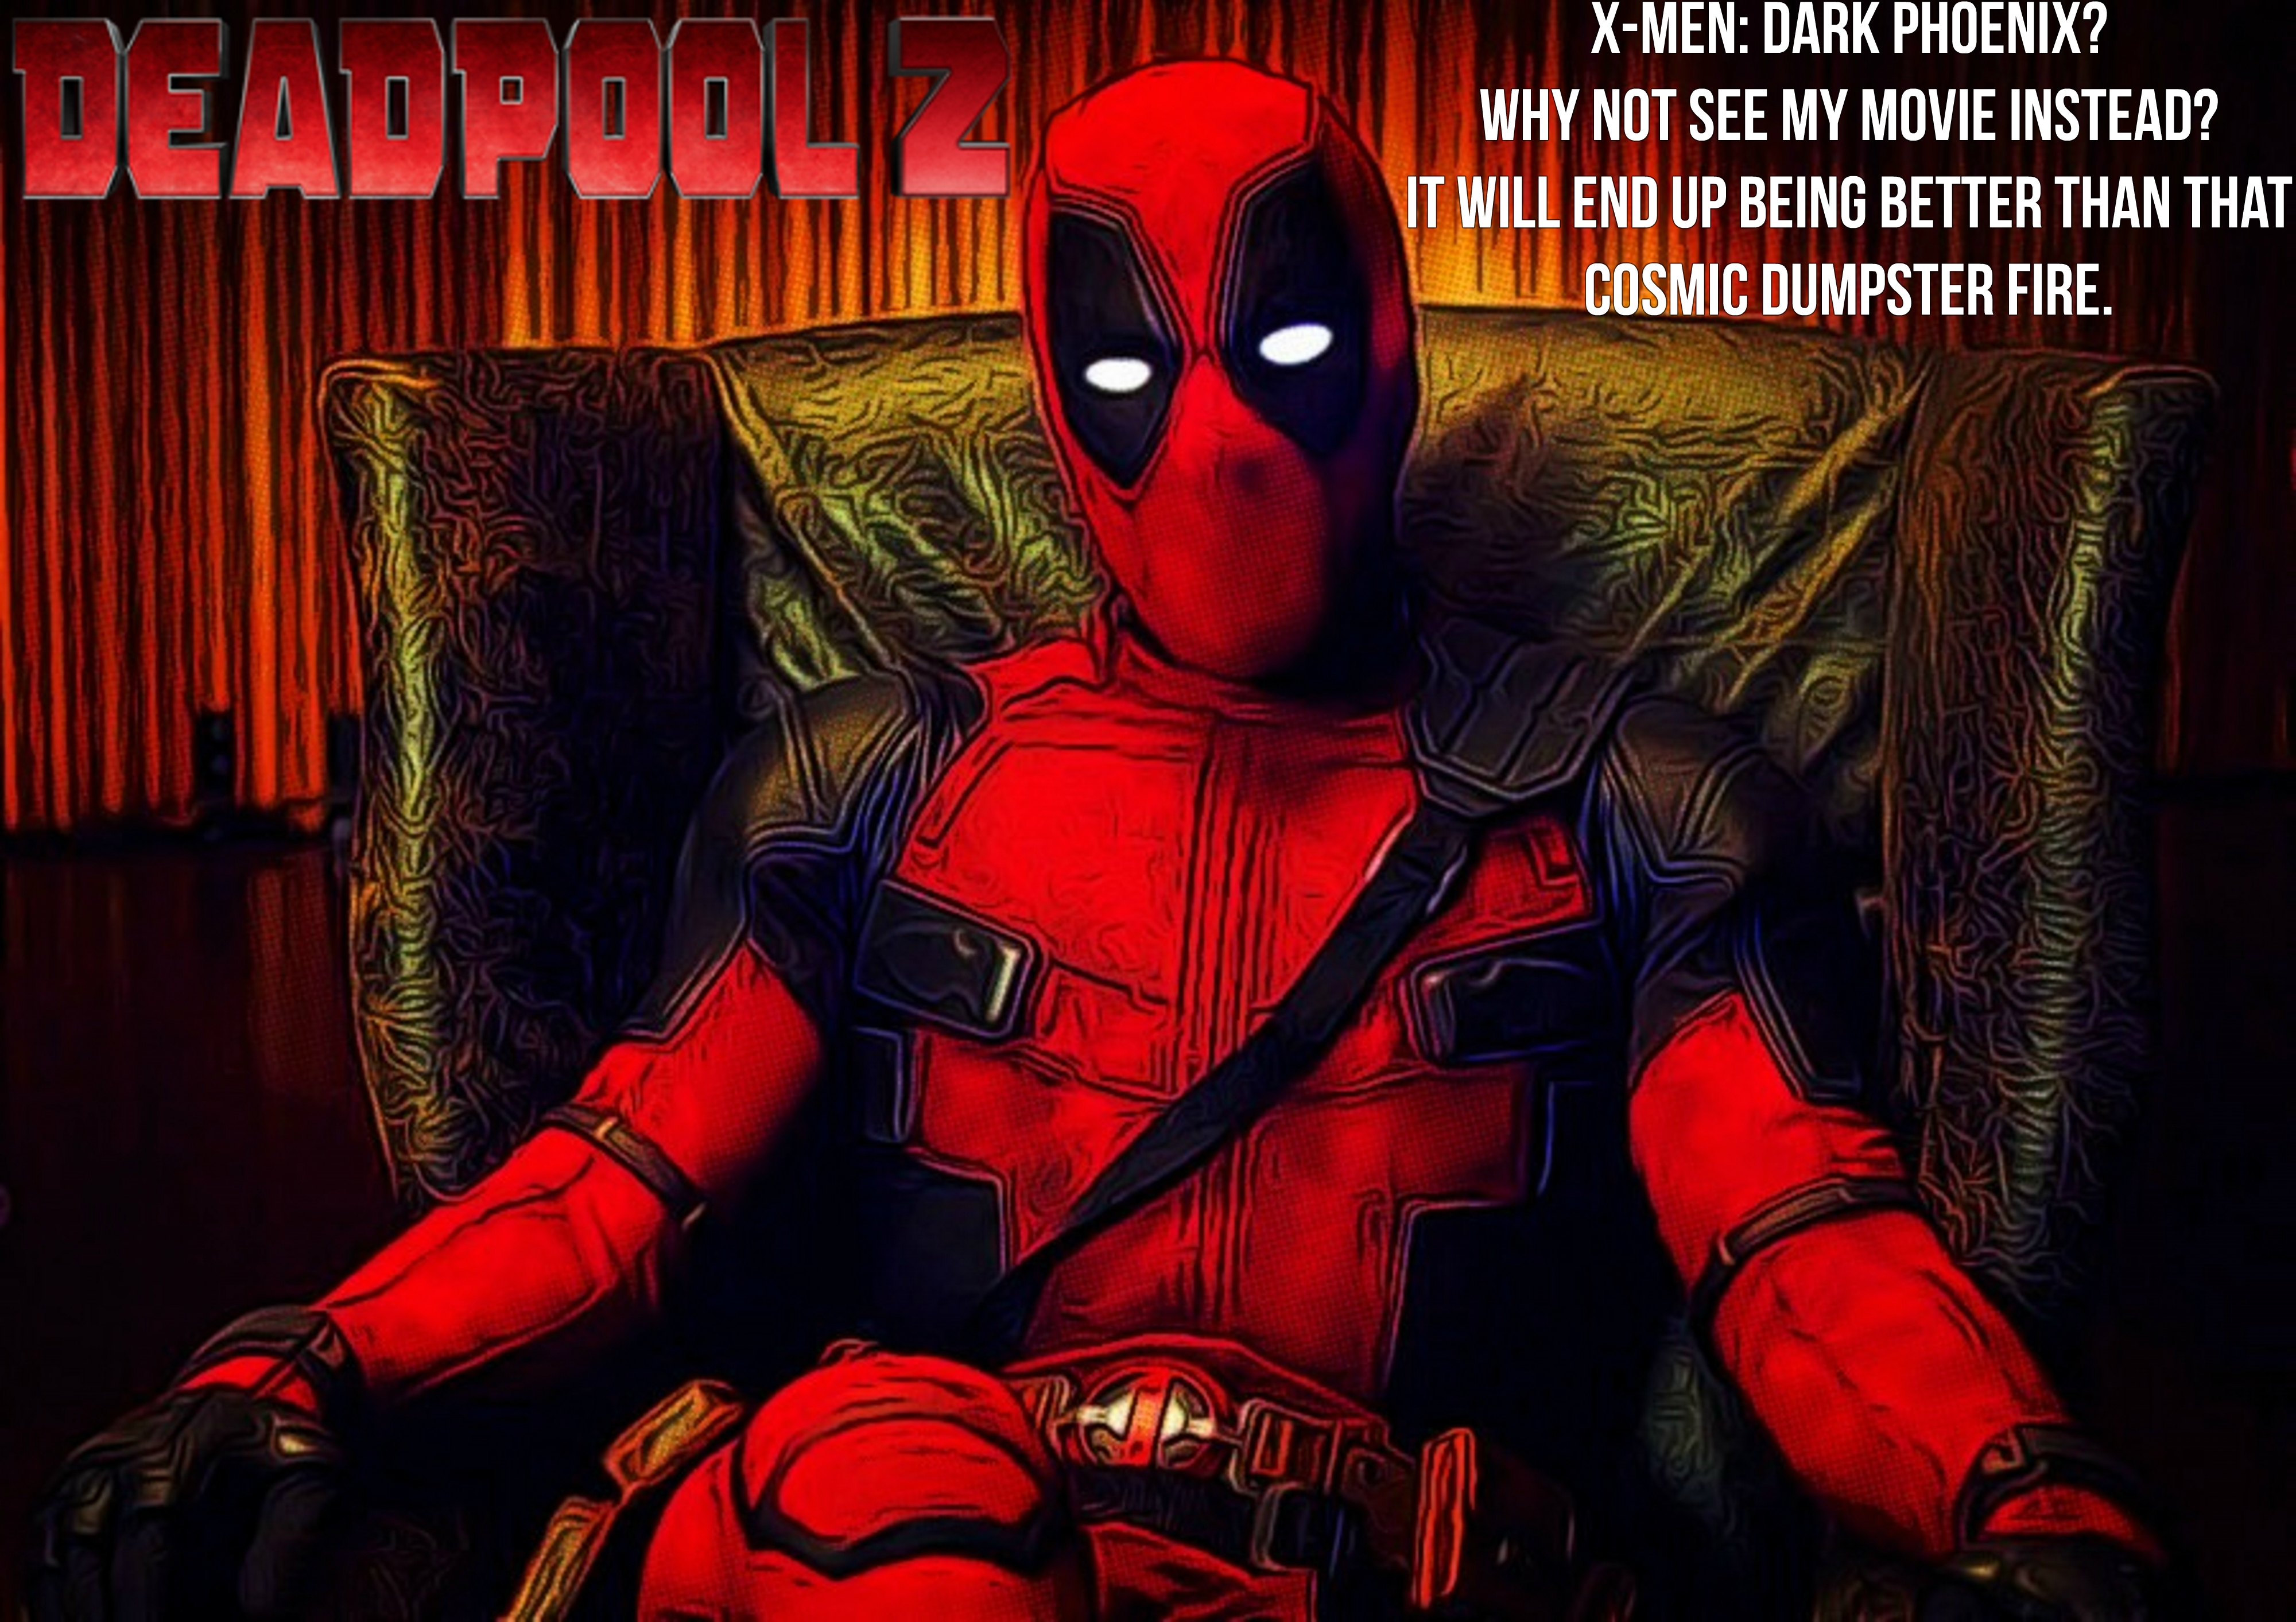 Deadpool 2 Funny Poster Wallpapers